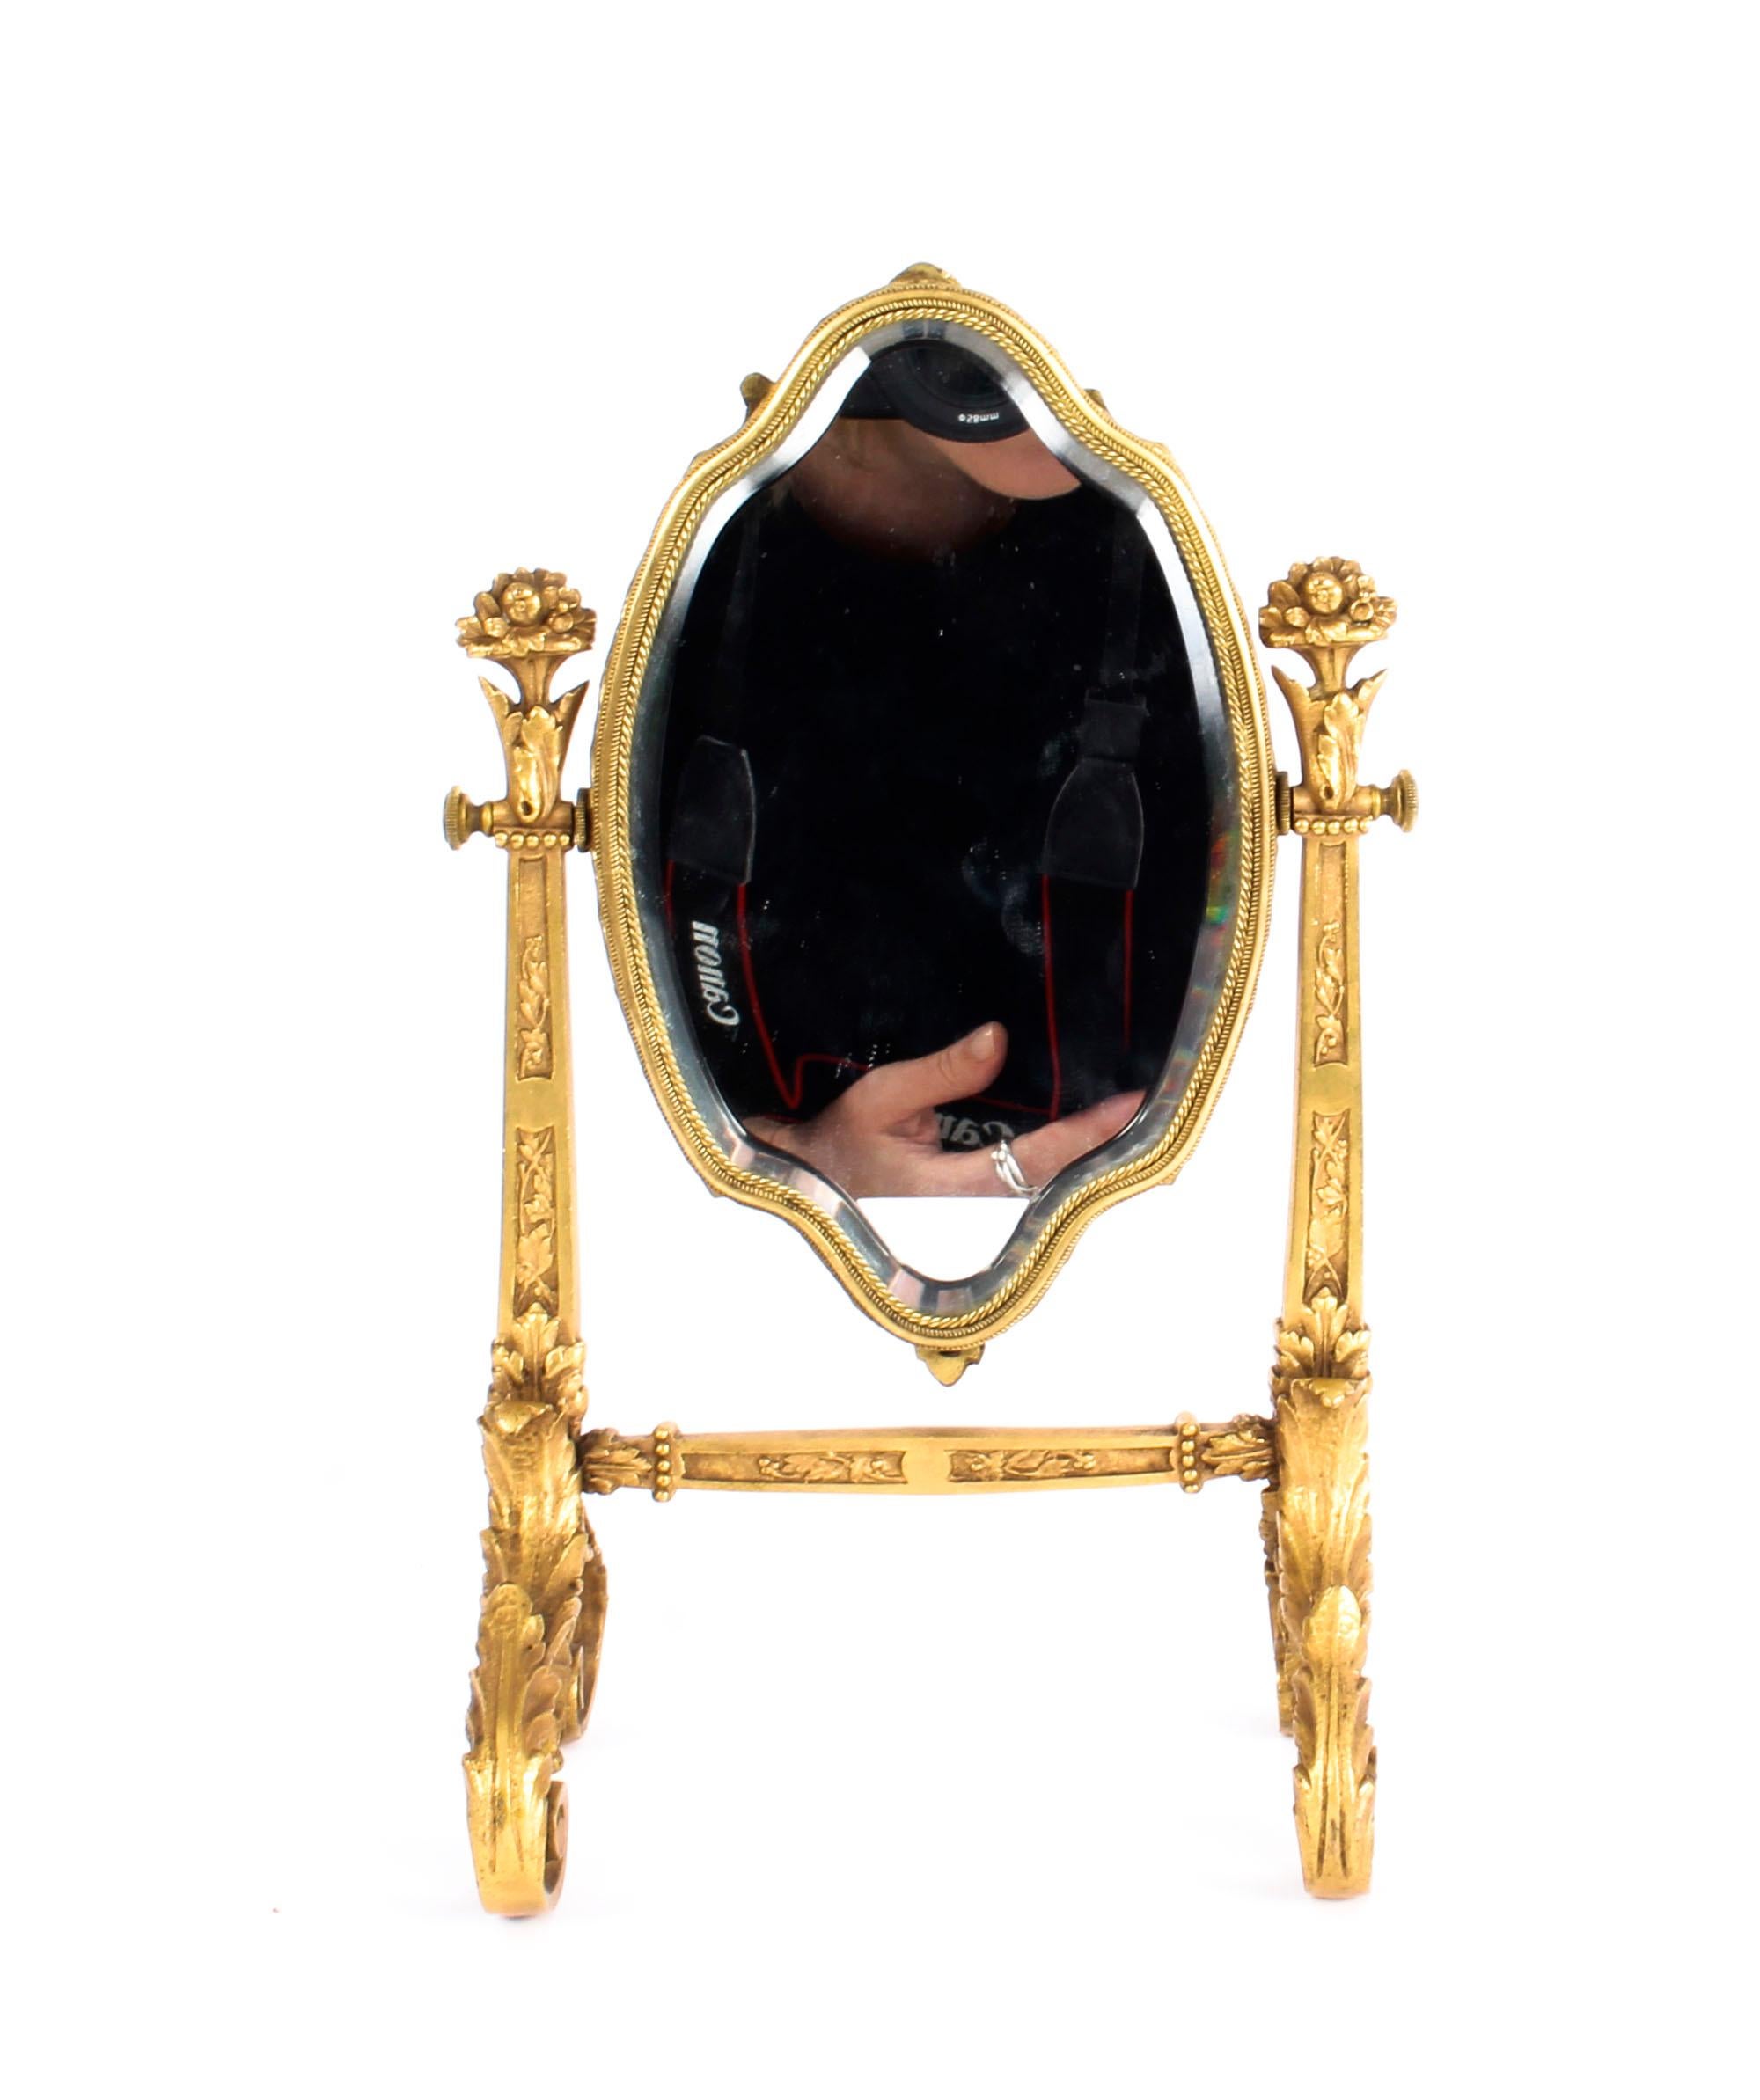 Antique French Ormolu and Limoges Enamel Table Mirror F.Bienvue, 19th Century For Sale 2